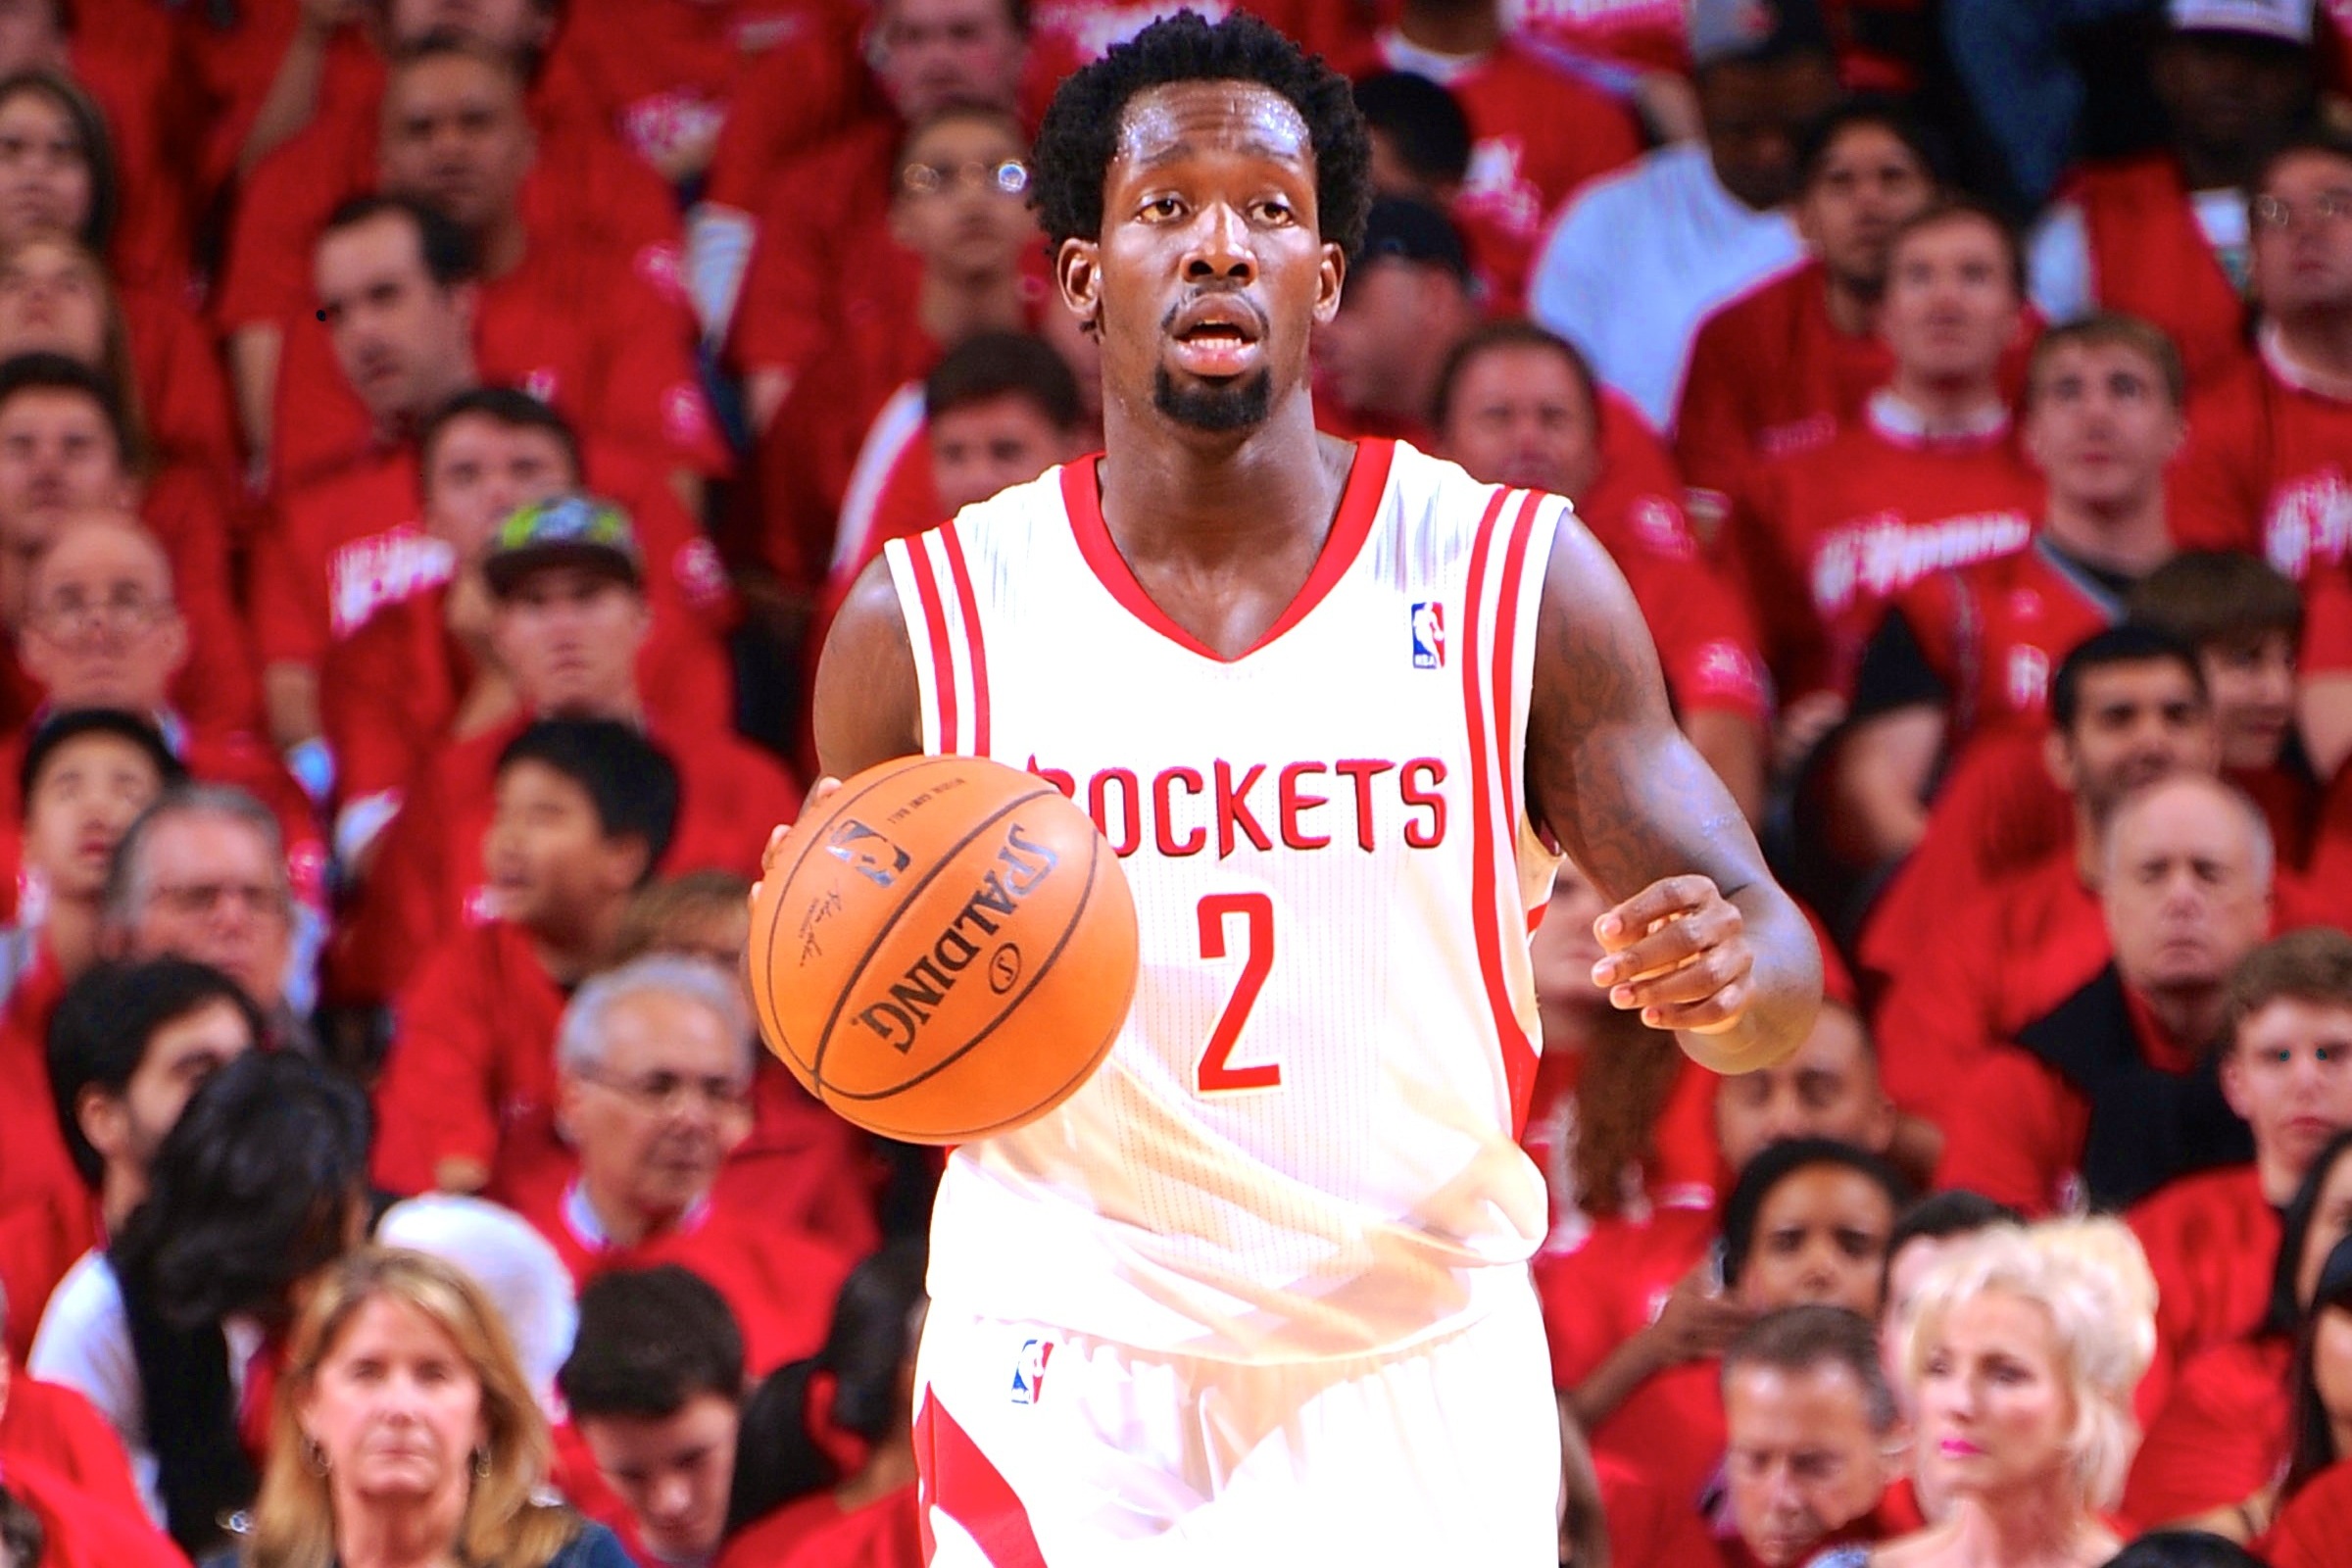 WholeHogSports - Box score obscures Patrick Beverley's impact